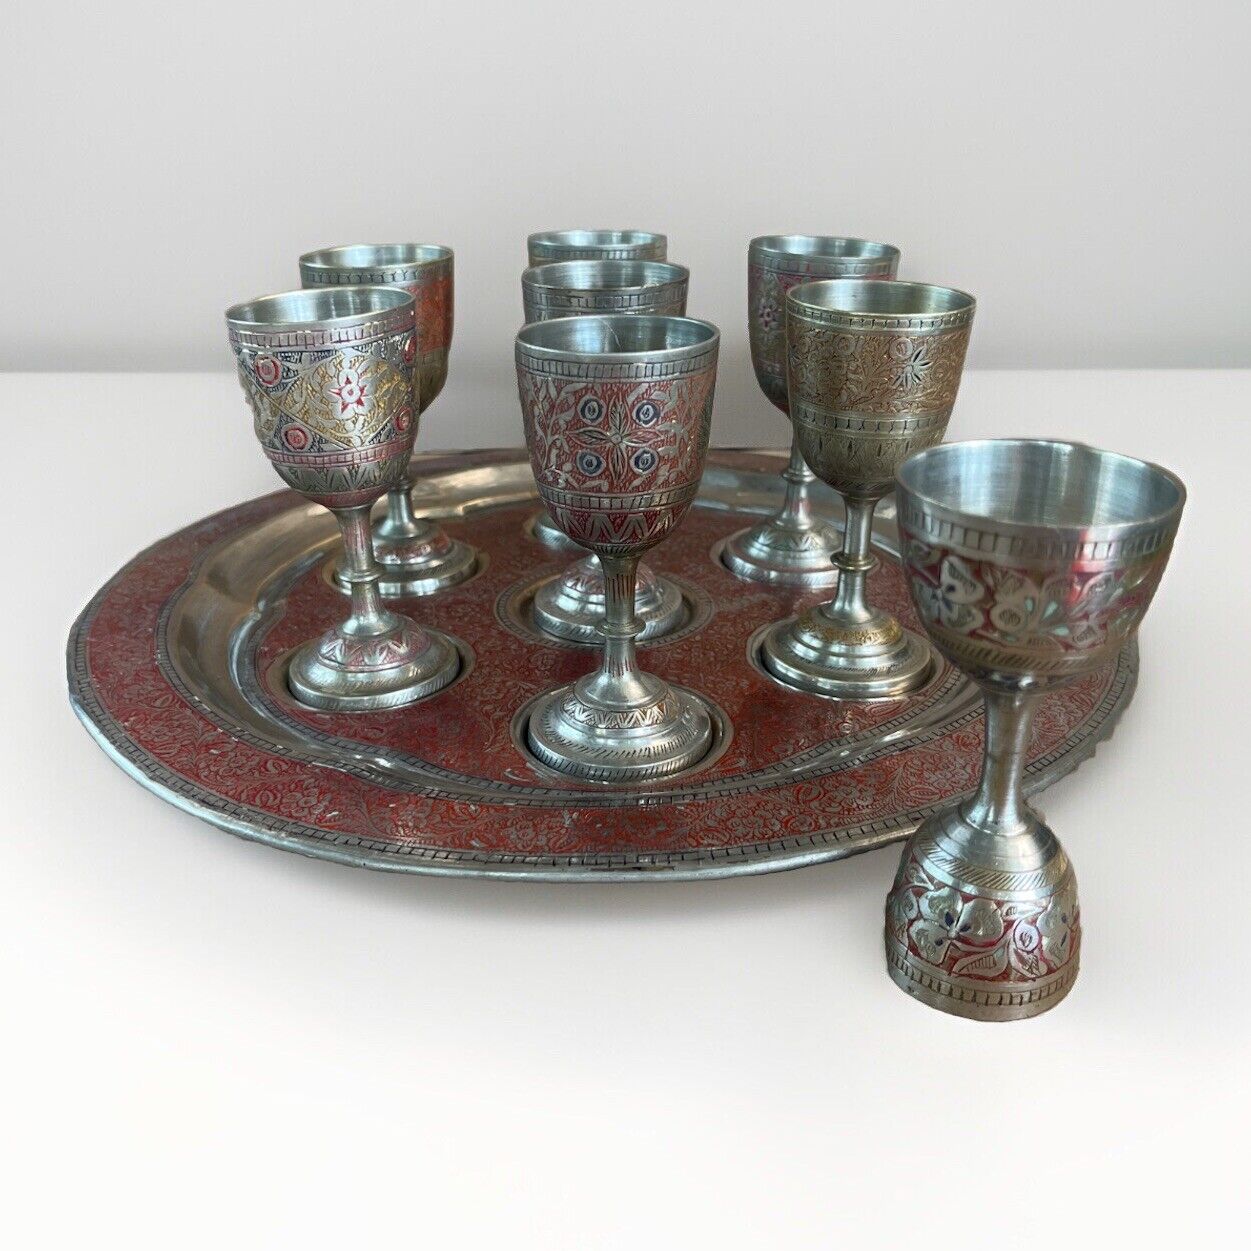 VTG Indian Etched Enamel Silver-Brass Metalware 7 Cordial Cups,Tray,Shot Glass